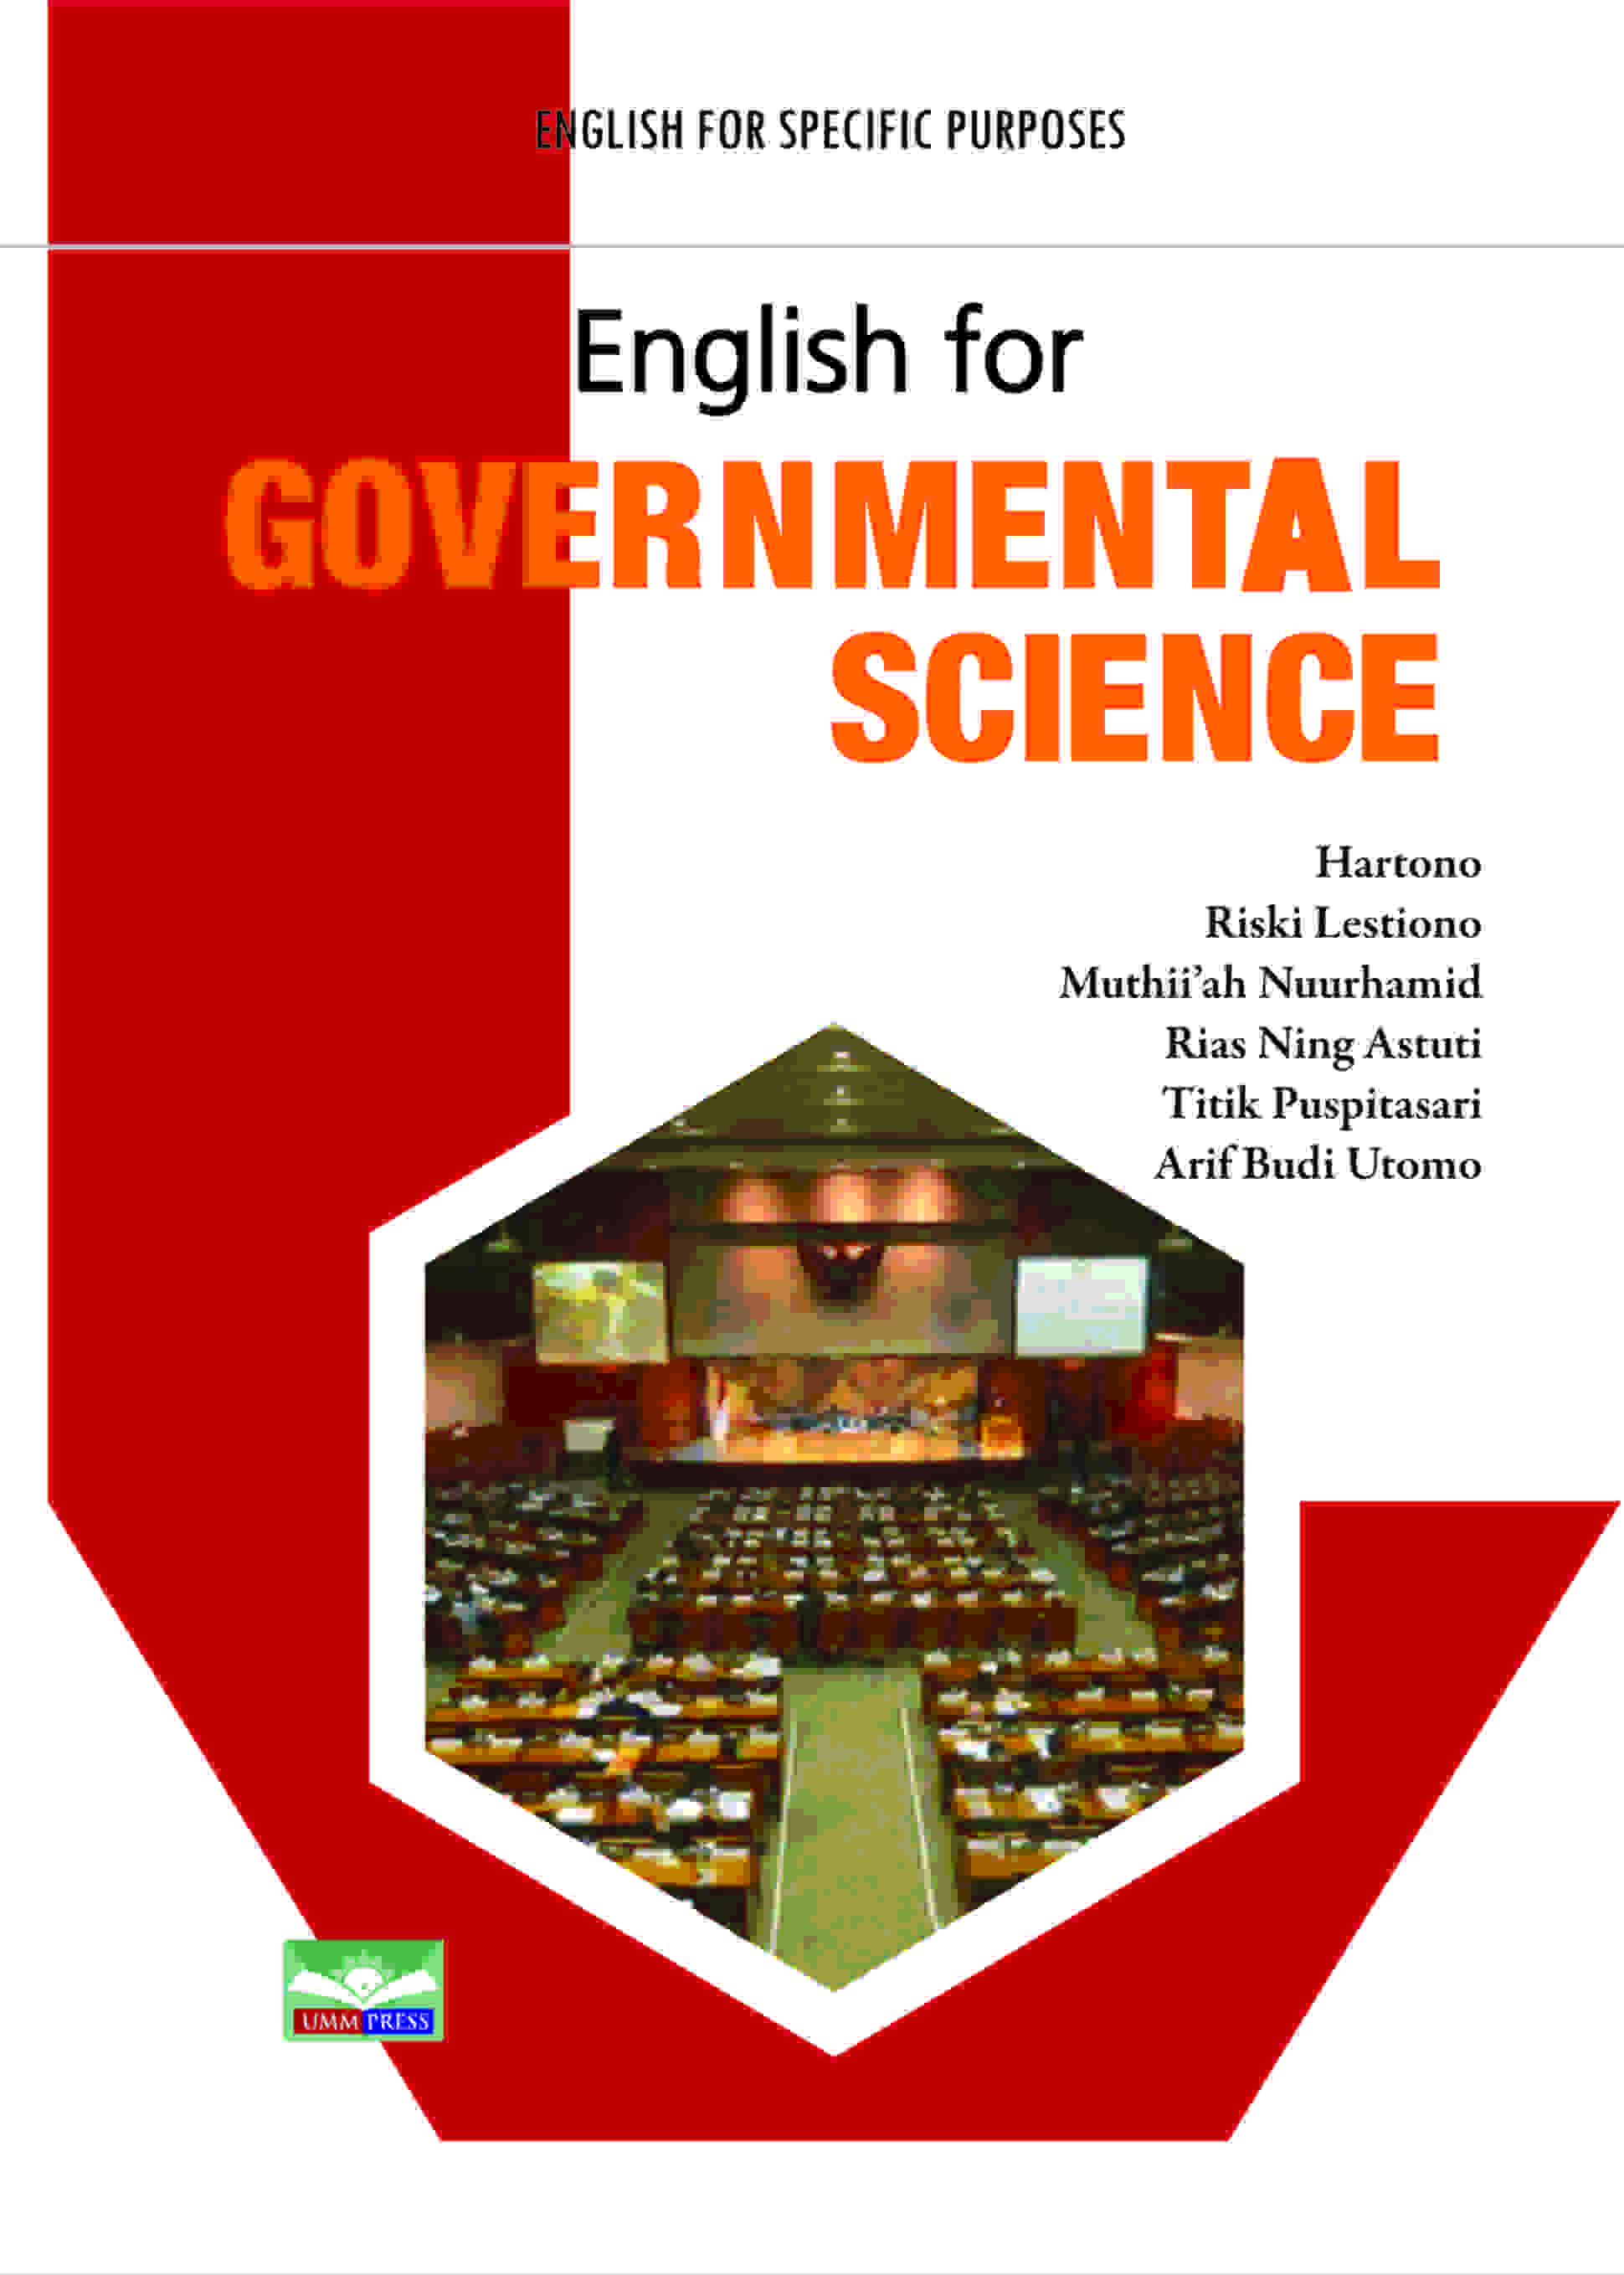 ESP - ENGLISH FOR GOVERNMENTAL SCIENCE